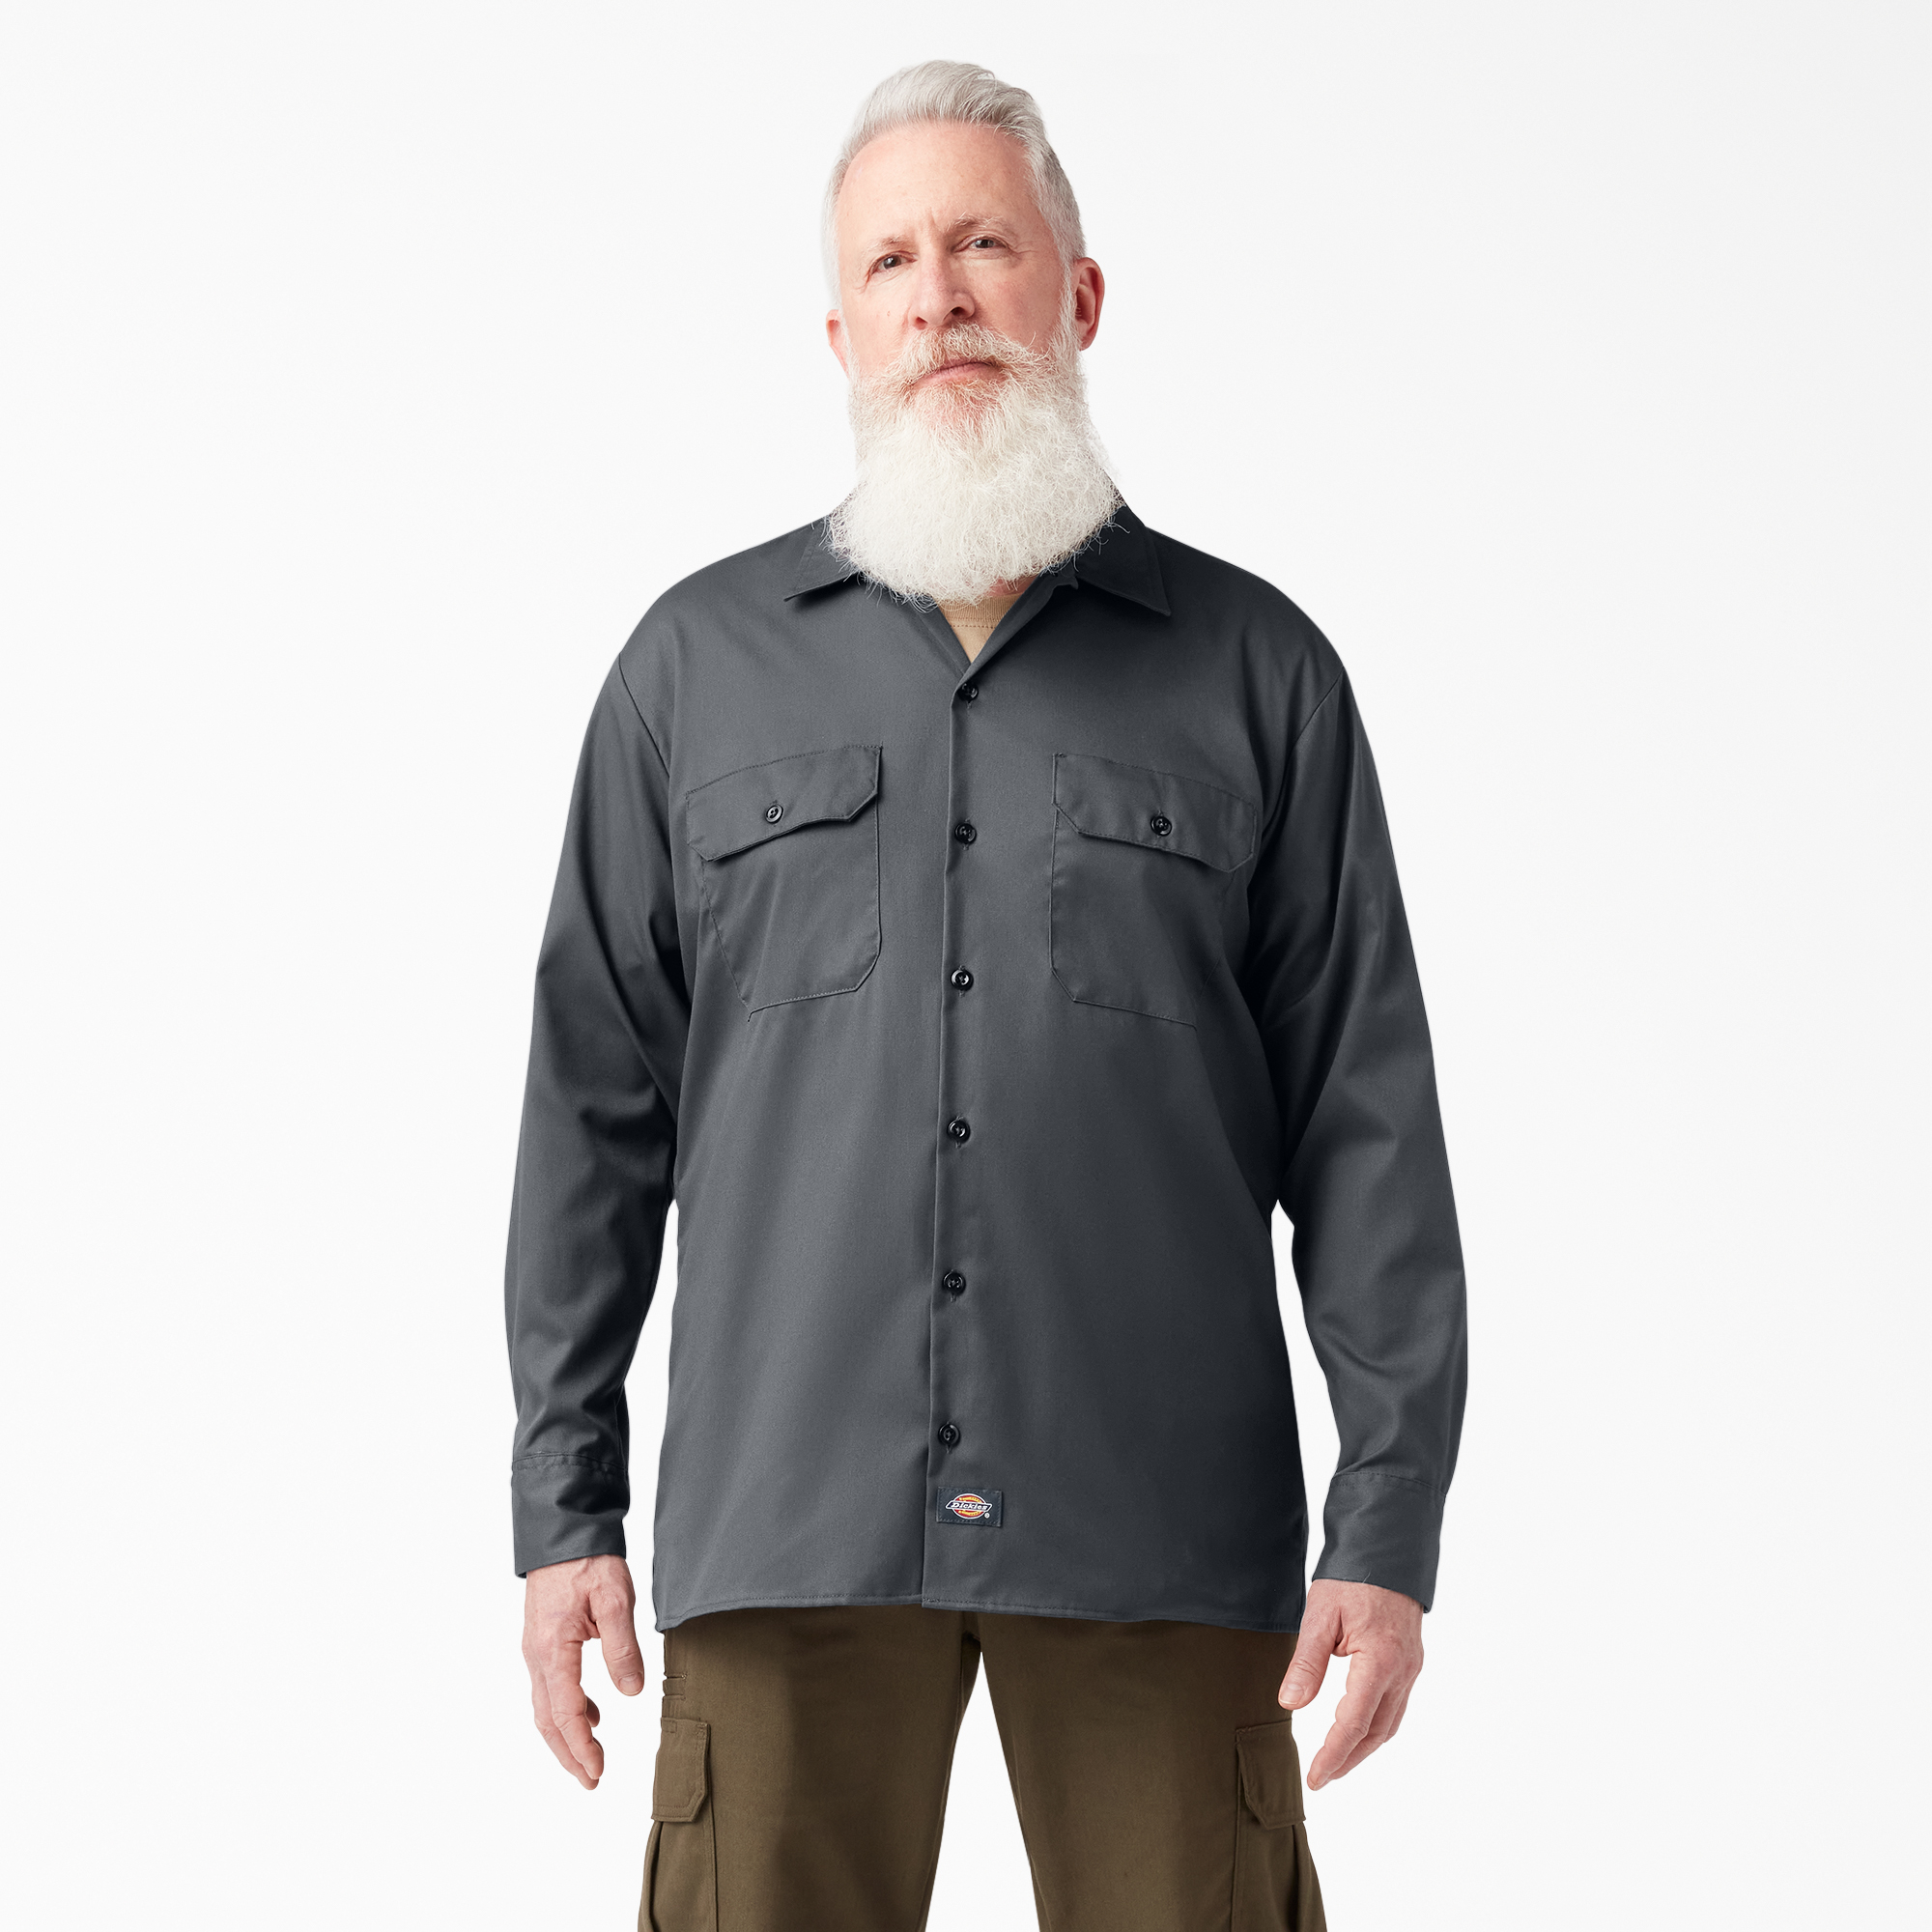 FLEX Relaxed Fit Long Sleeve Twill Work Shirt - Charcoal Gray (CH)